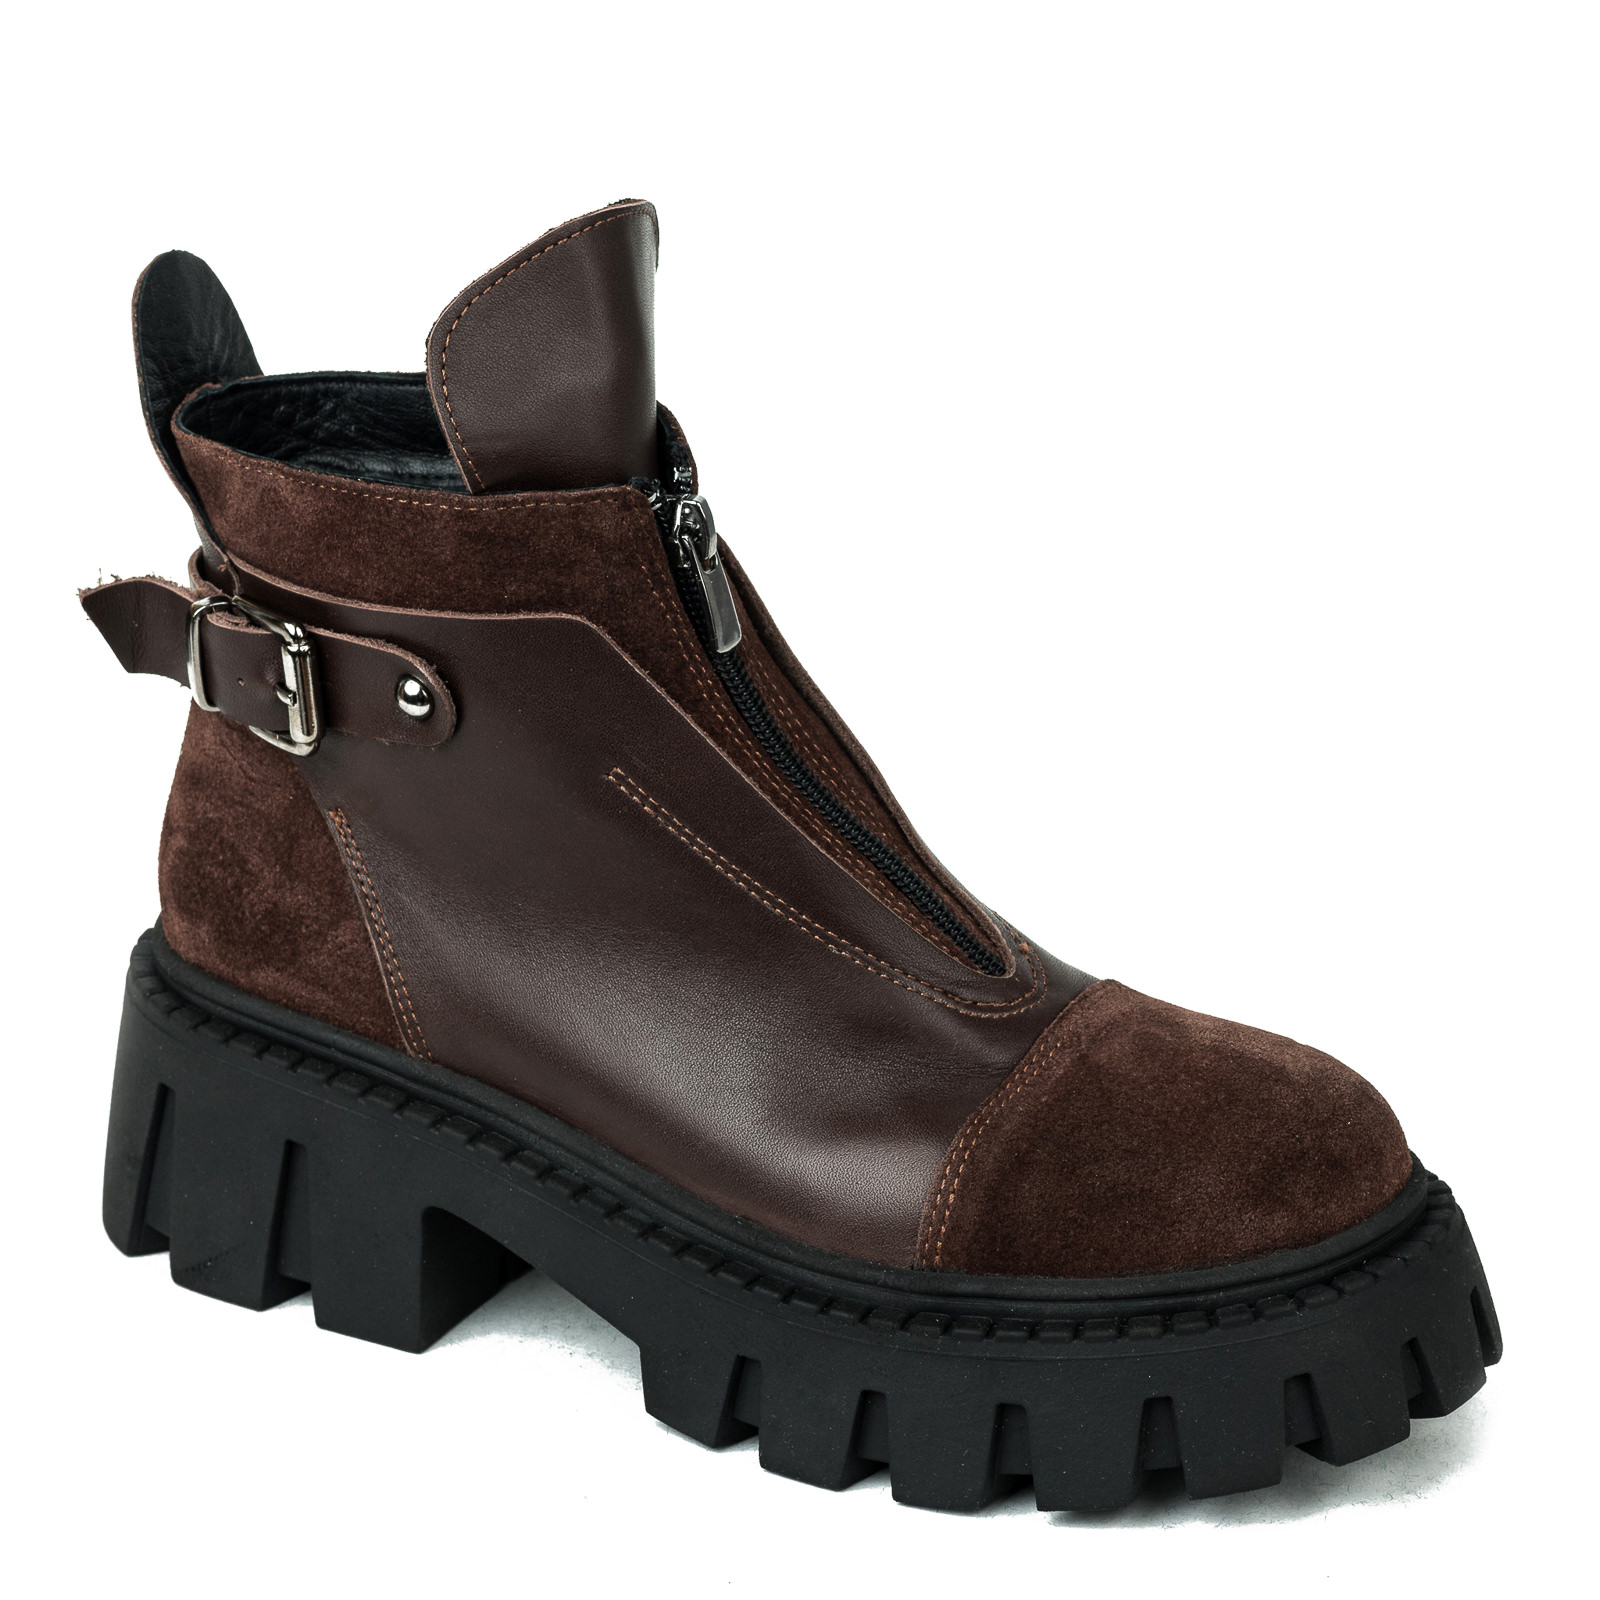 Leather booties B246 - BROWN